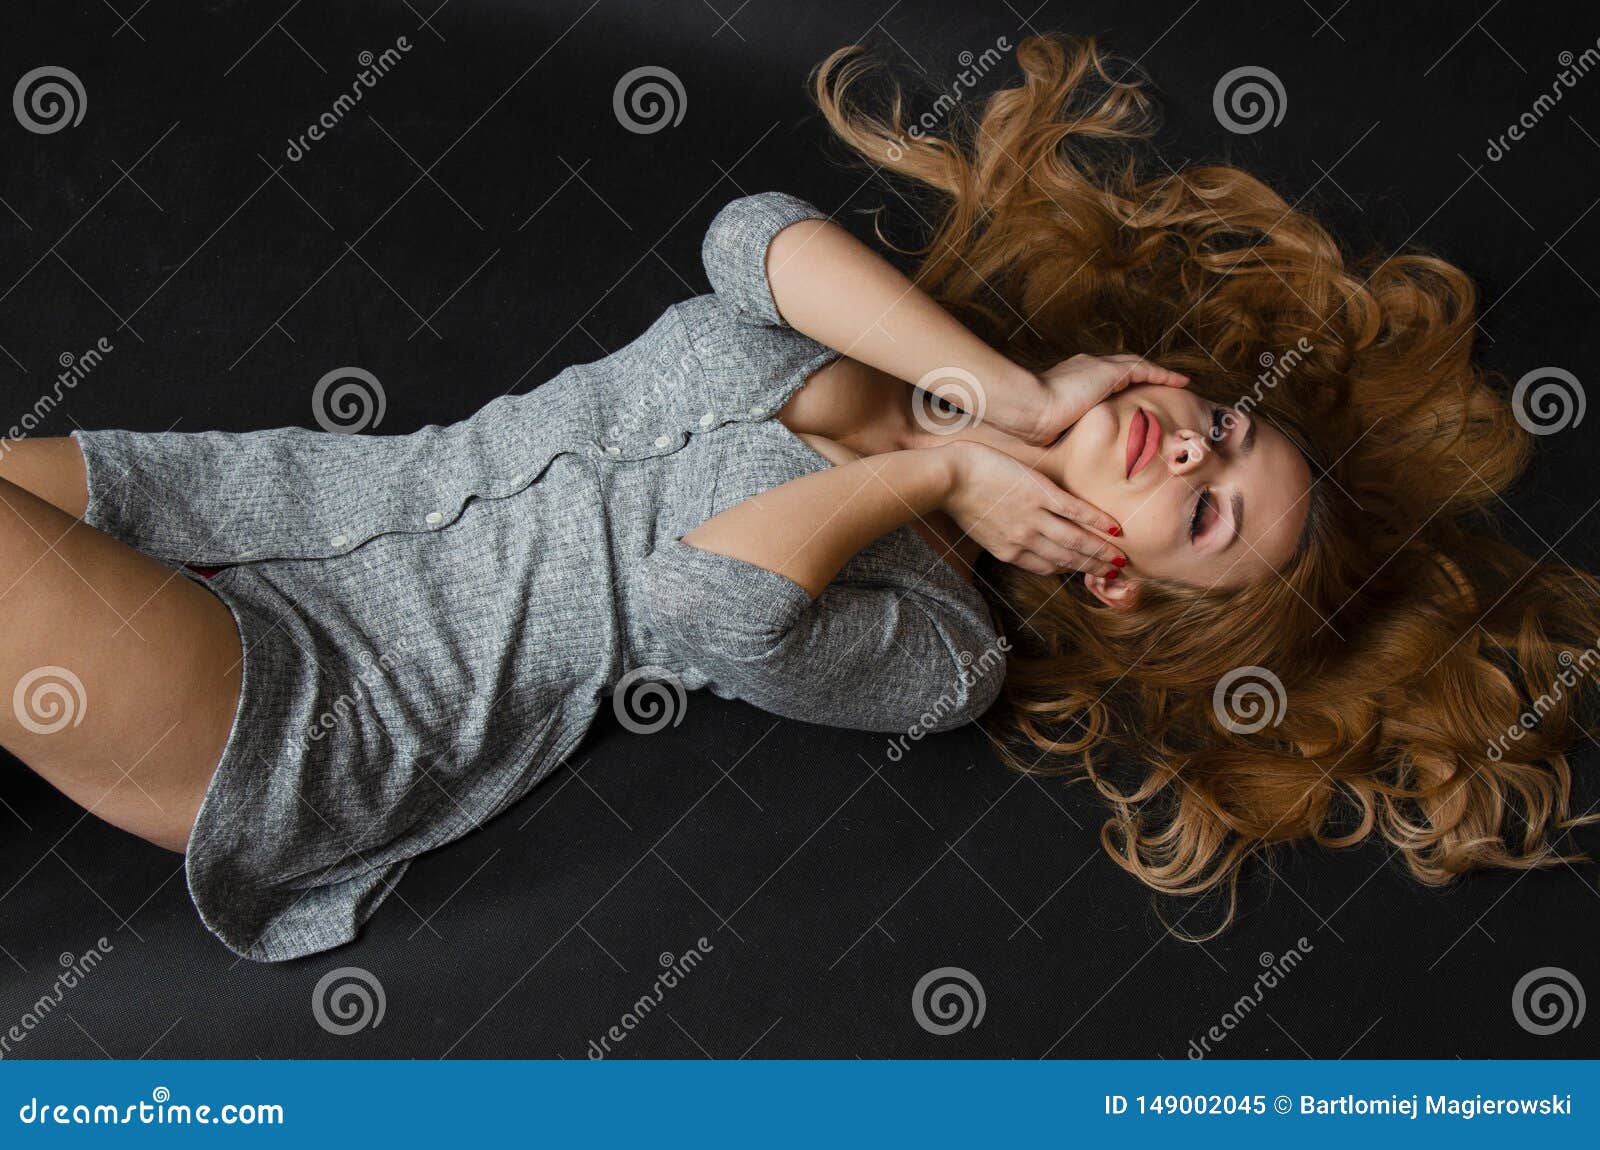 Girl Laying on Ground with Black Background Stock Image - Image of poland,  youth: 149002045